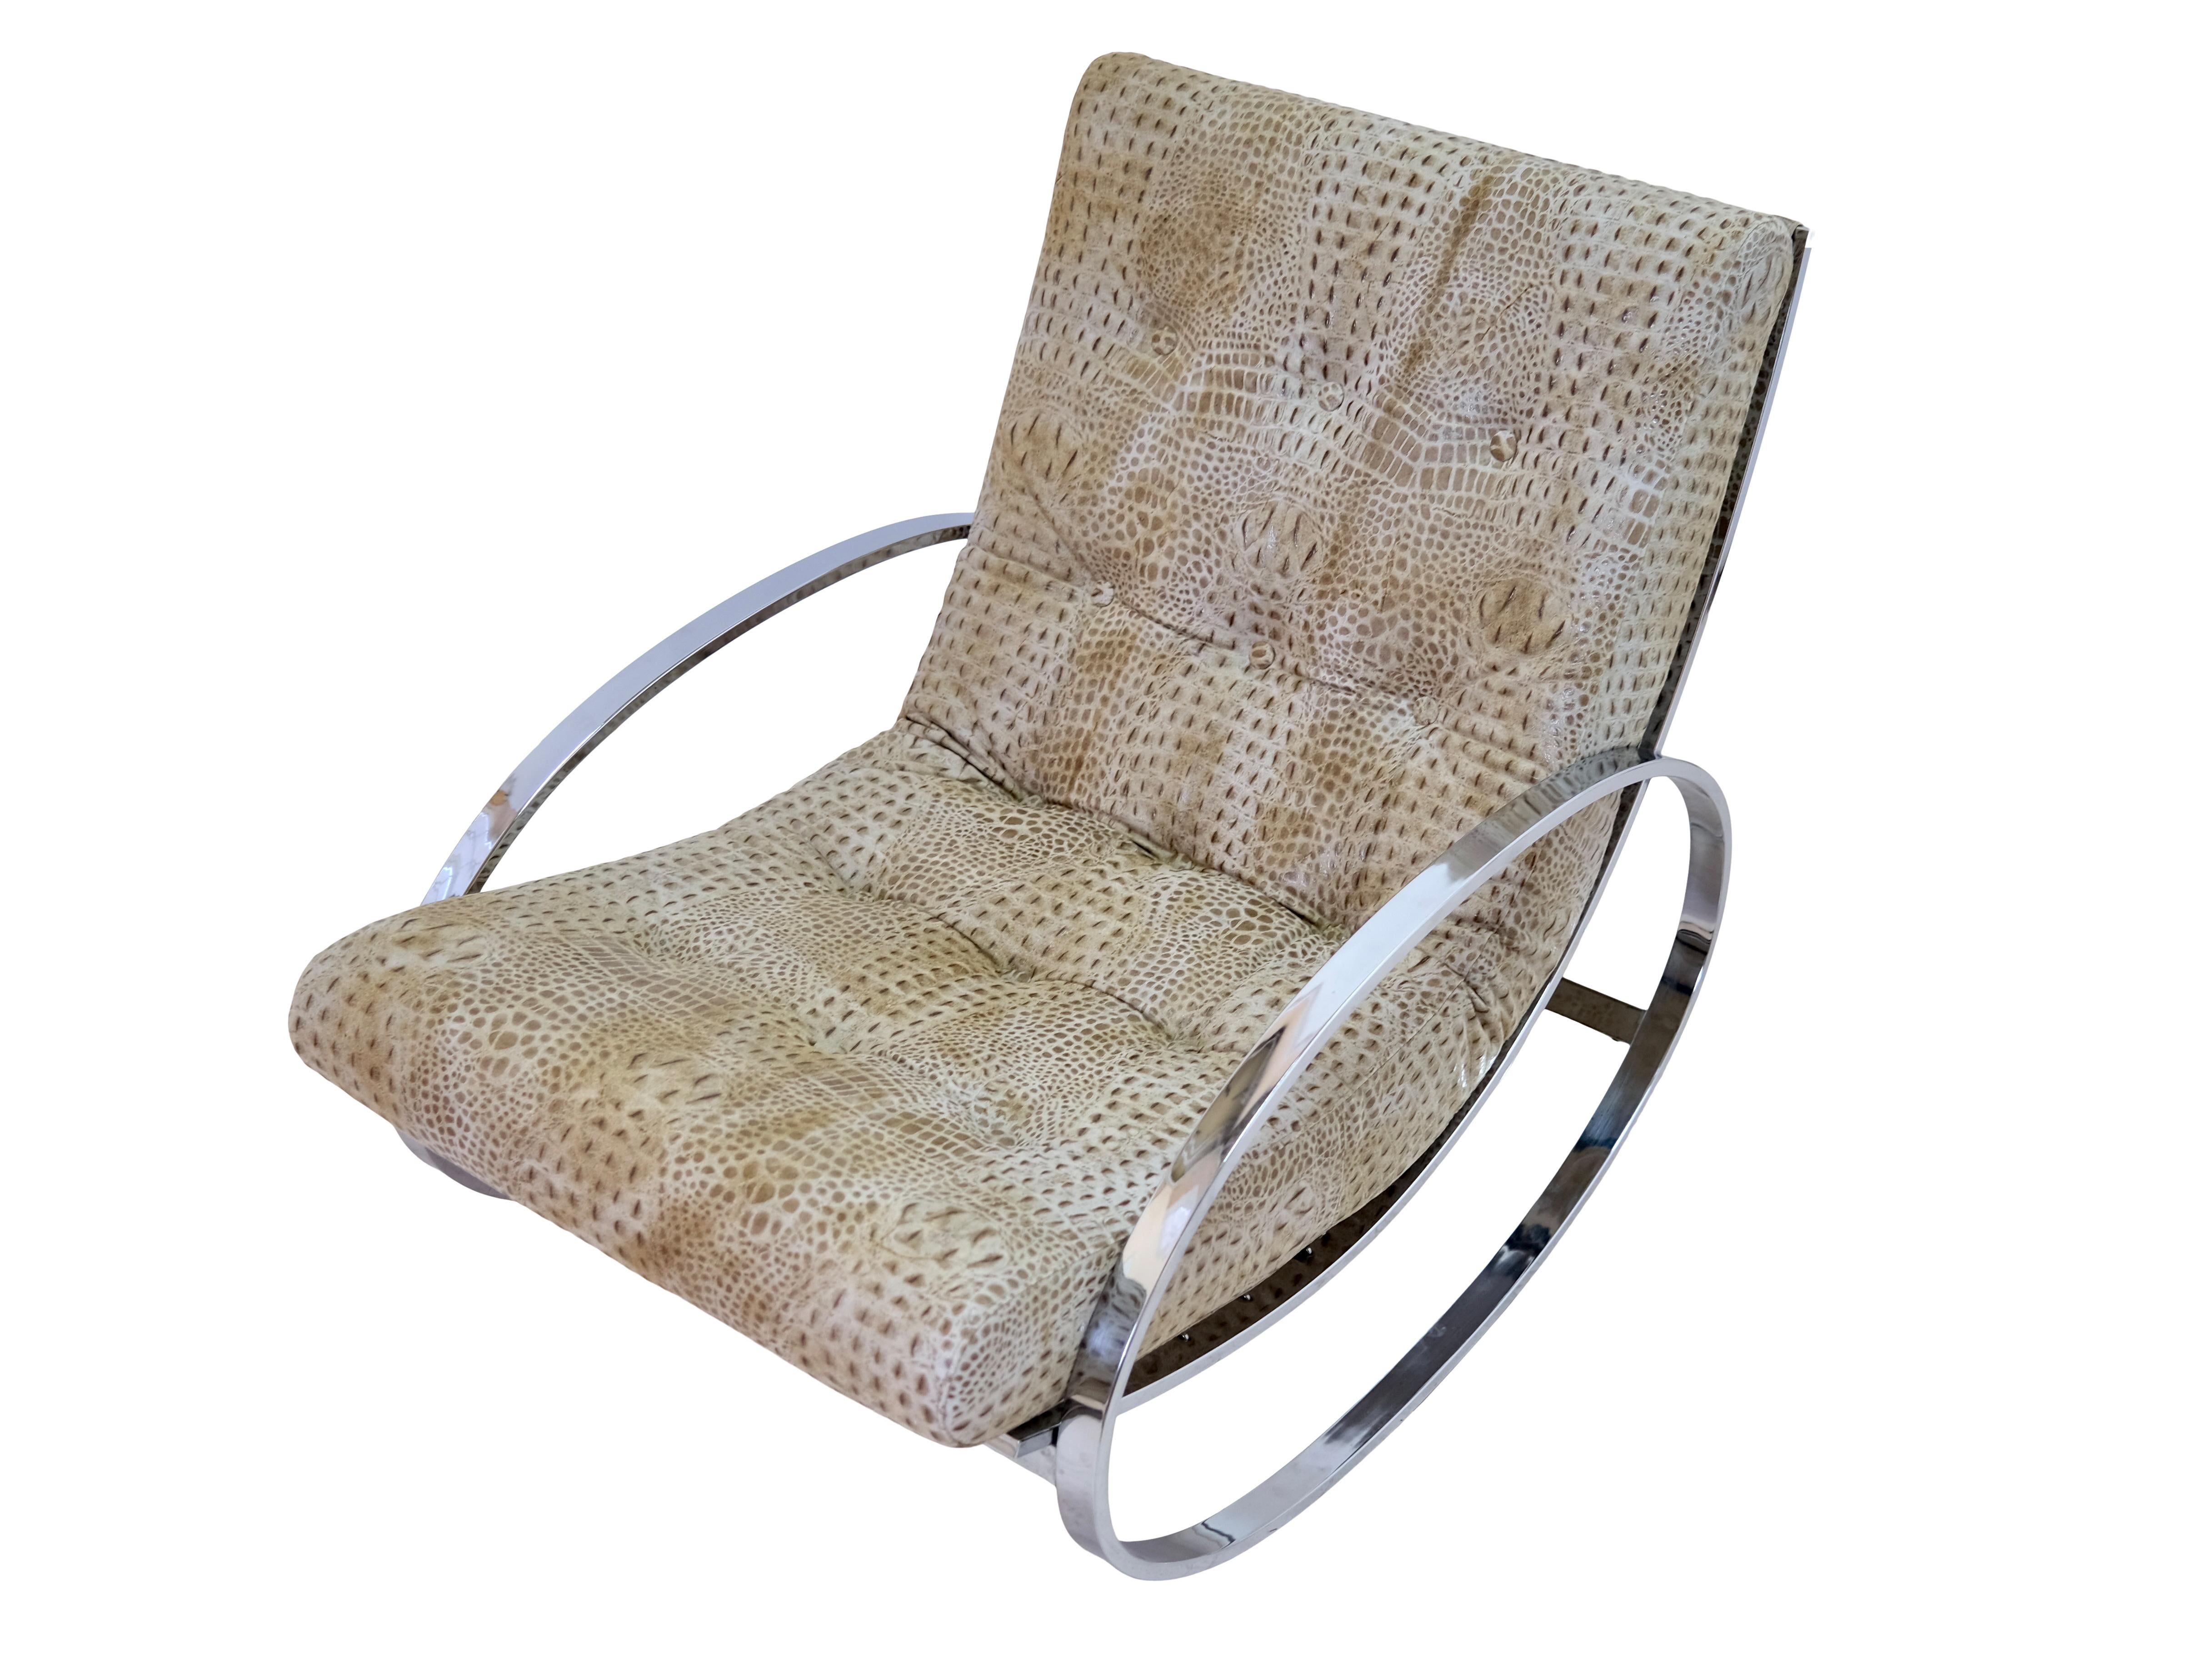 Mid Century Rocking Chair with Crocodile Embossing

Rocking chair / armchair
Square tubes with original chrome plating
Freshly upholstered, genuine leather with croco embossing

Mid-Century, 1960s

Dimensions:
Width: 70 cm
Height: 85 cm
Depth: 110